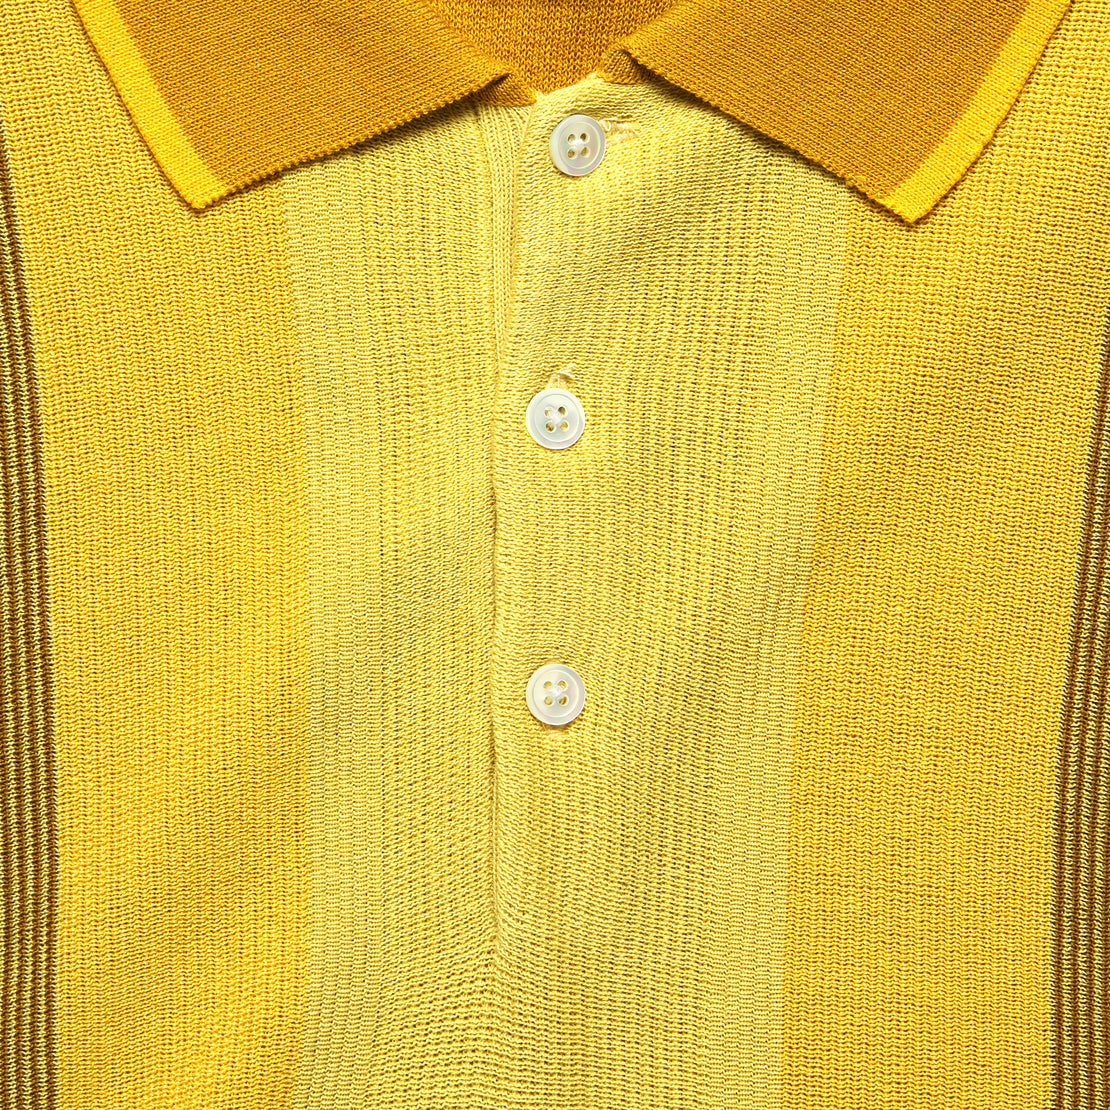 Knit Polo - Mustard Stripe - BEAMS+ - STAG Provisions - Tops - S/S Knit